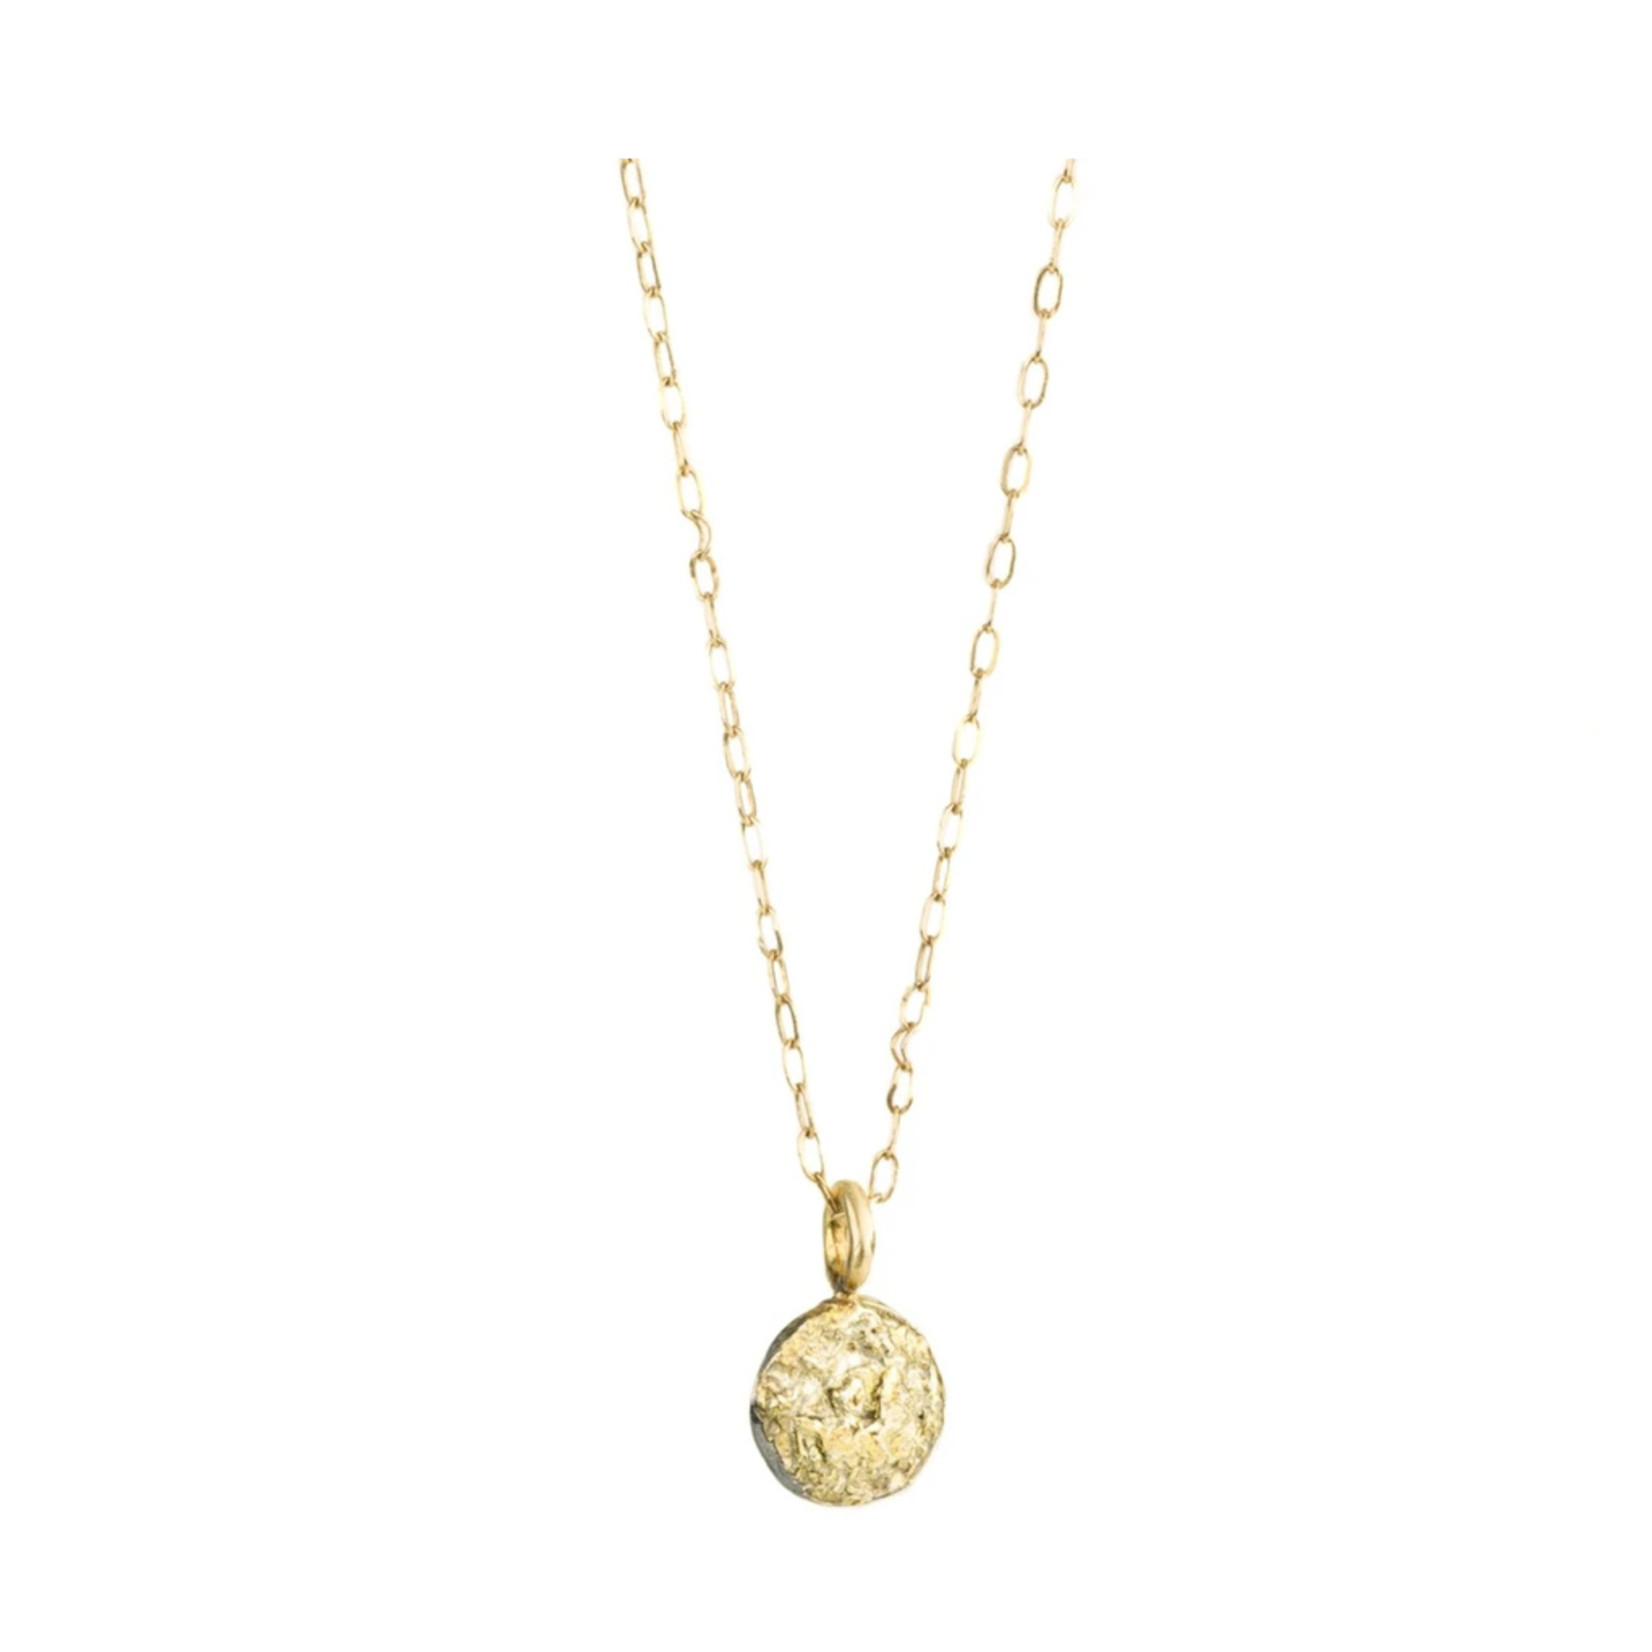 Dusted Pebble Necklace - 14k Gold Chain